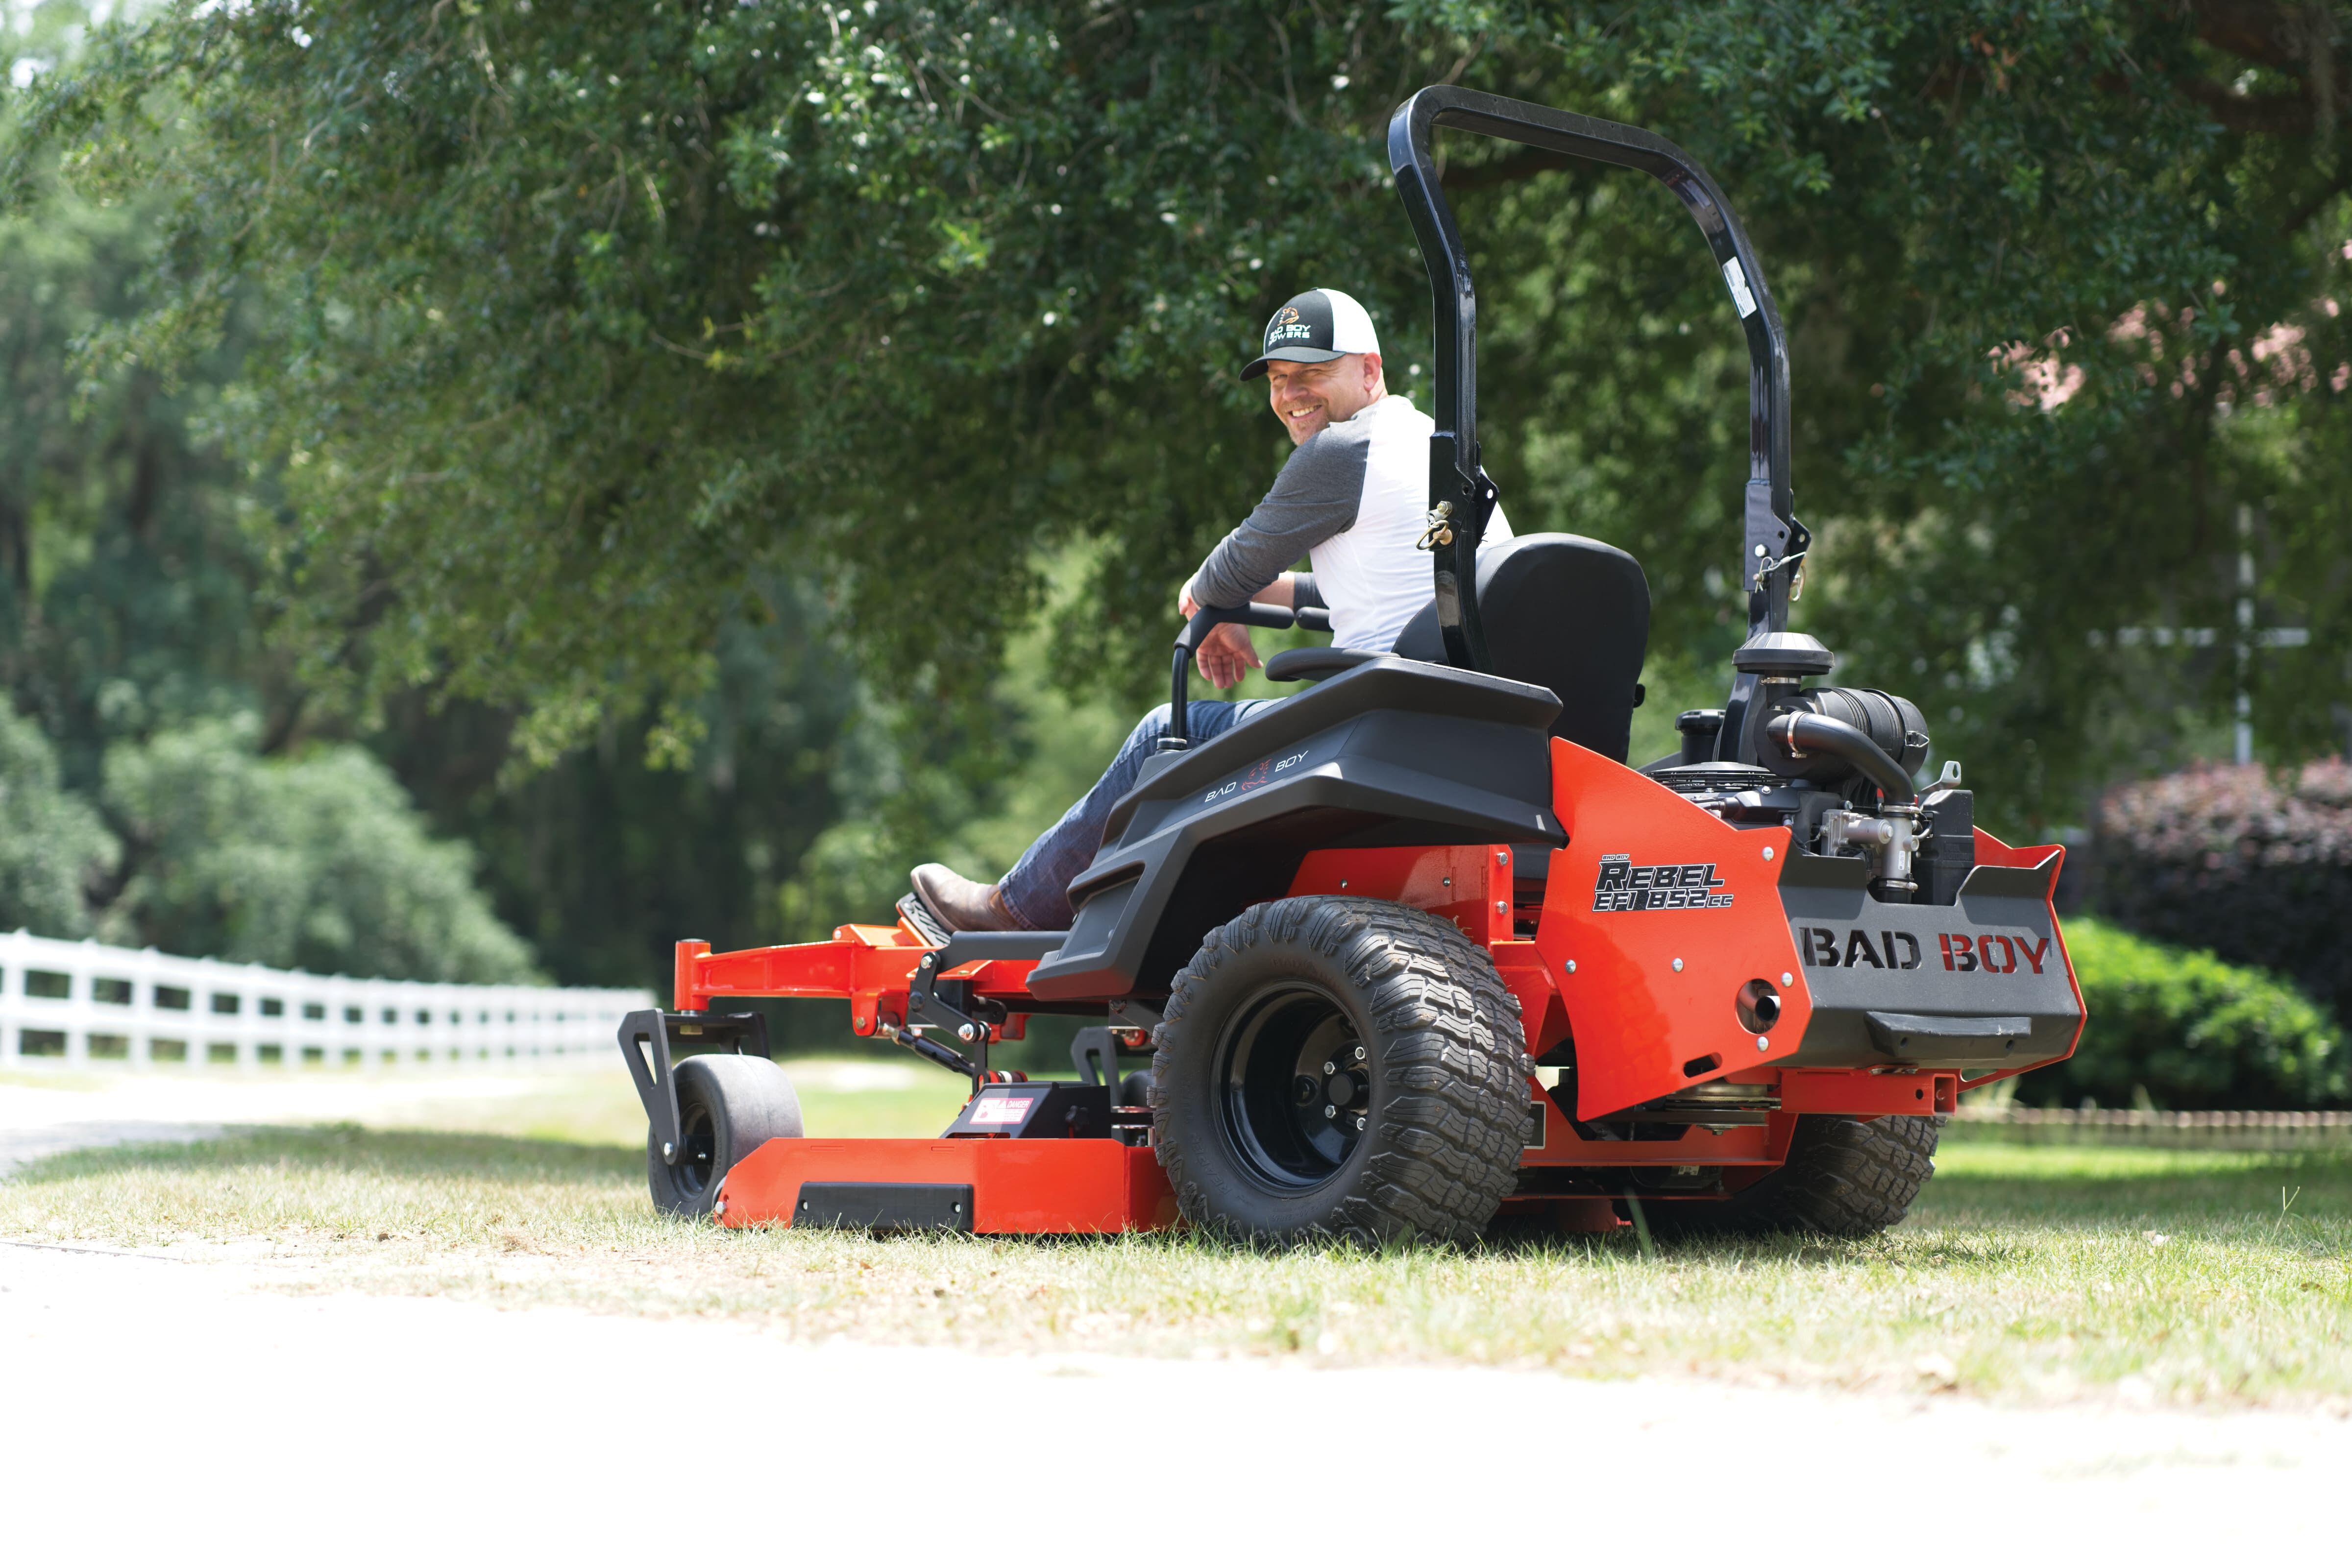 Outlaw Rebel Commercial Zero Turn Lawn Mower with 61" Deck and 852cc Kawasaki Engine